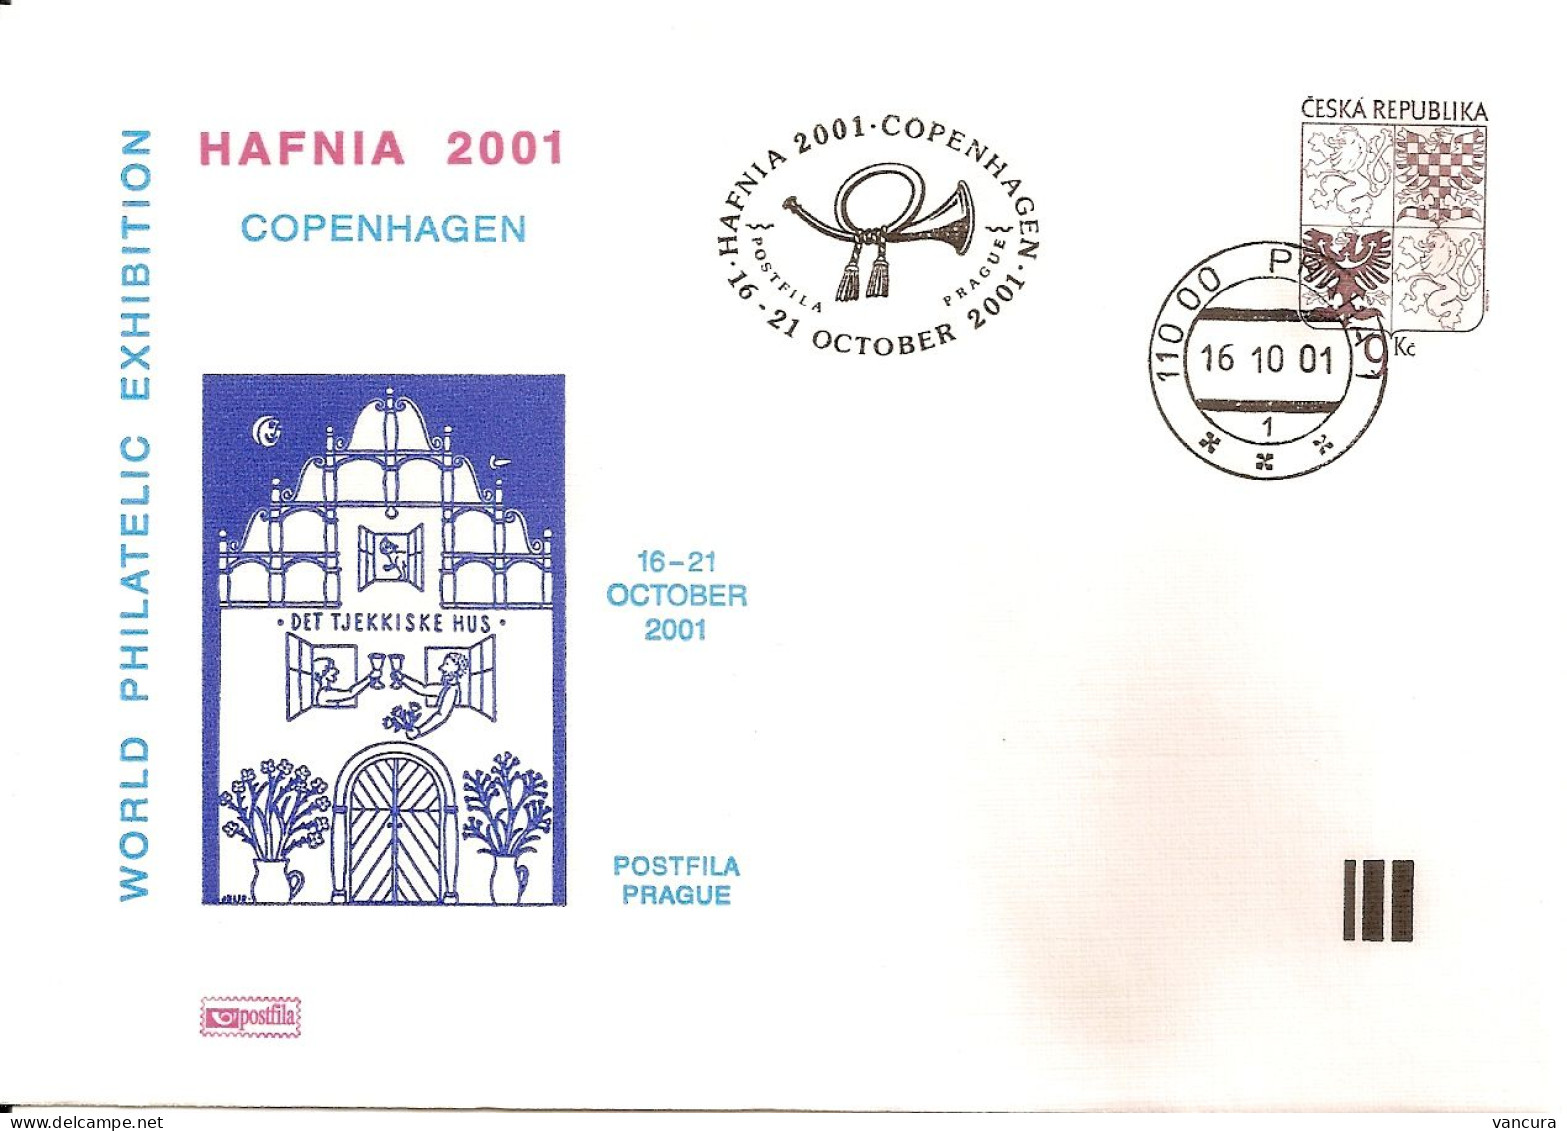 COB A 75 Czech Republic Hafnia Stamp Exhibition 2001 NOTICE POOR SCAN, BUT THE COVER IS FINE! - Sobres